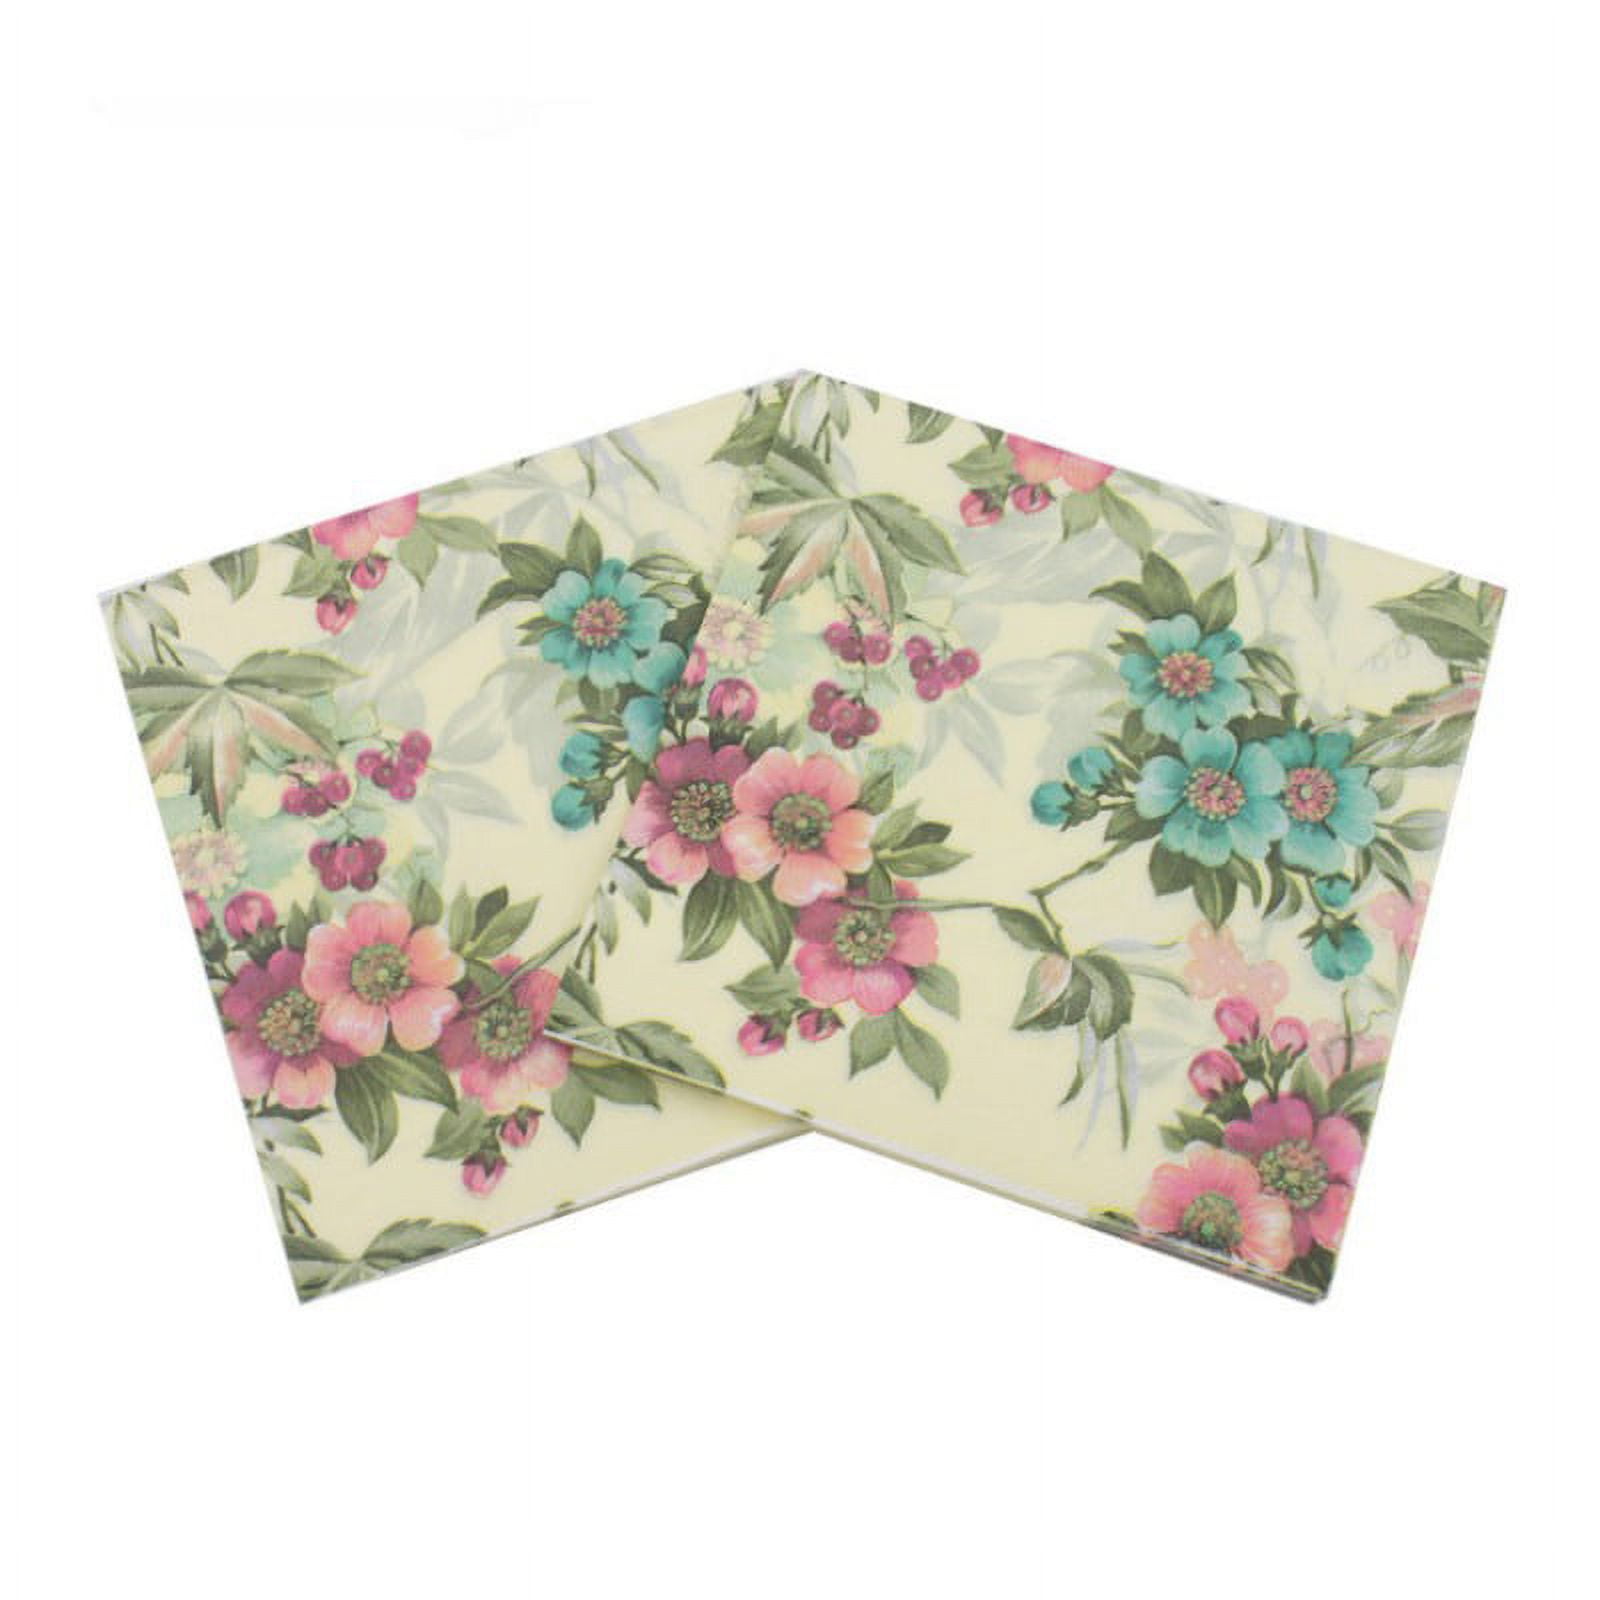 20-ct 13x13 Pretty Printed Napkins Colorful Flower Napkins Decorative Napkins for Decoupage Floral Paper Napkins Mother's Day Napkins Wildflower